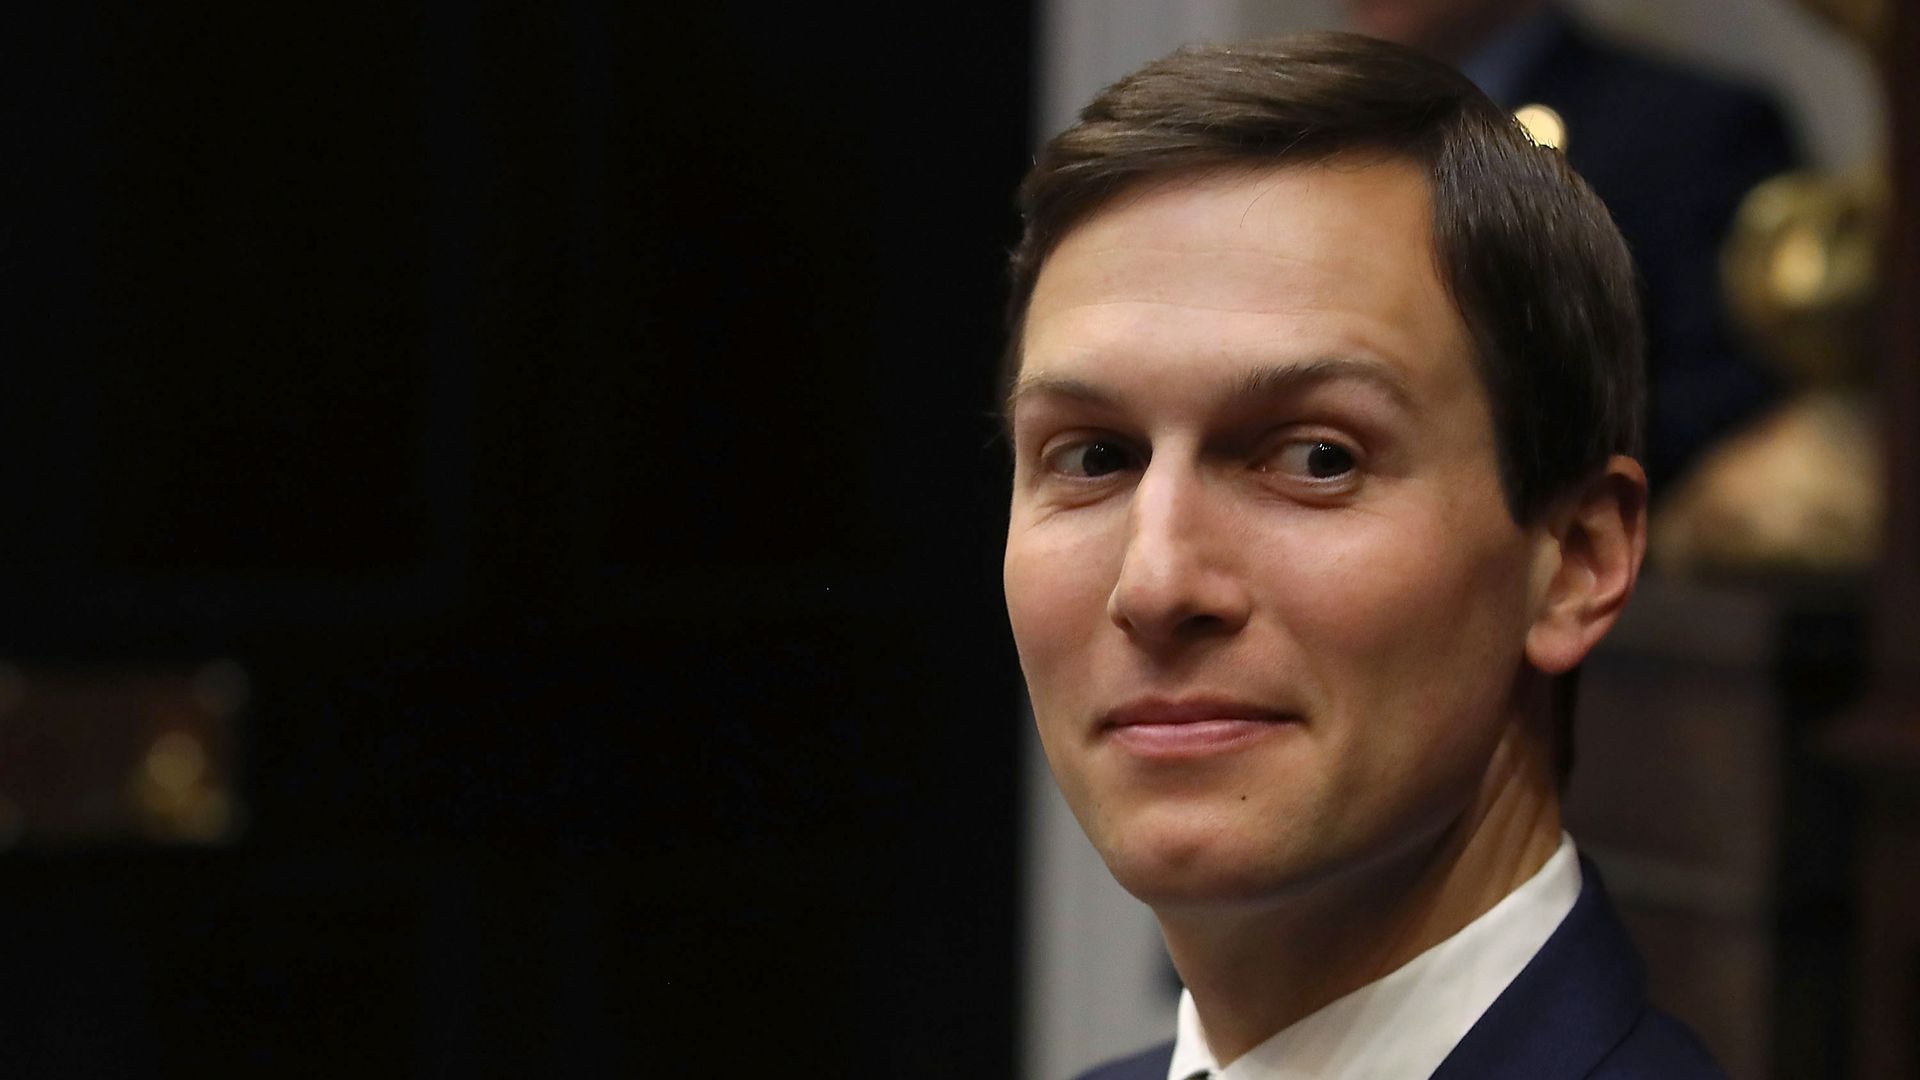 Jared Kushner looks out of the corner of his eye with a smile